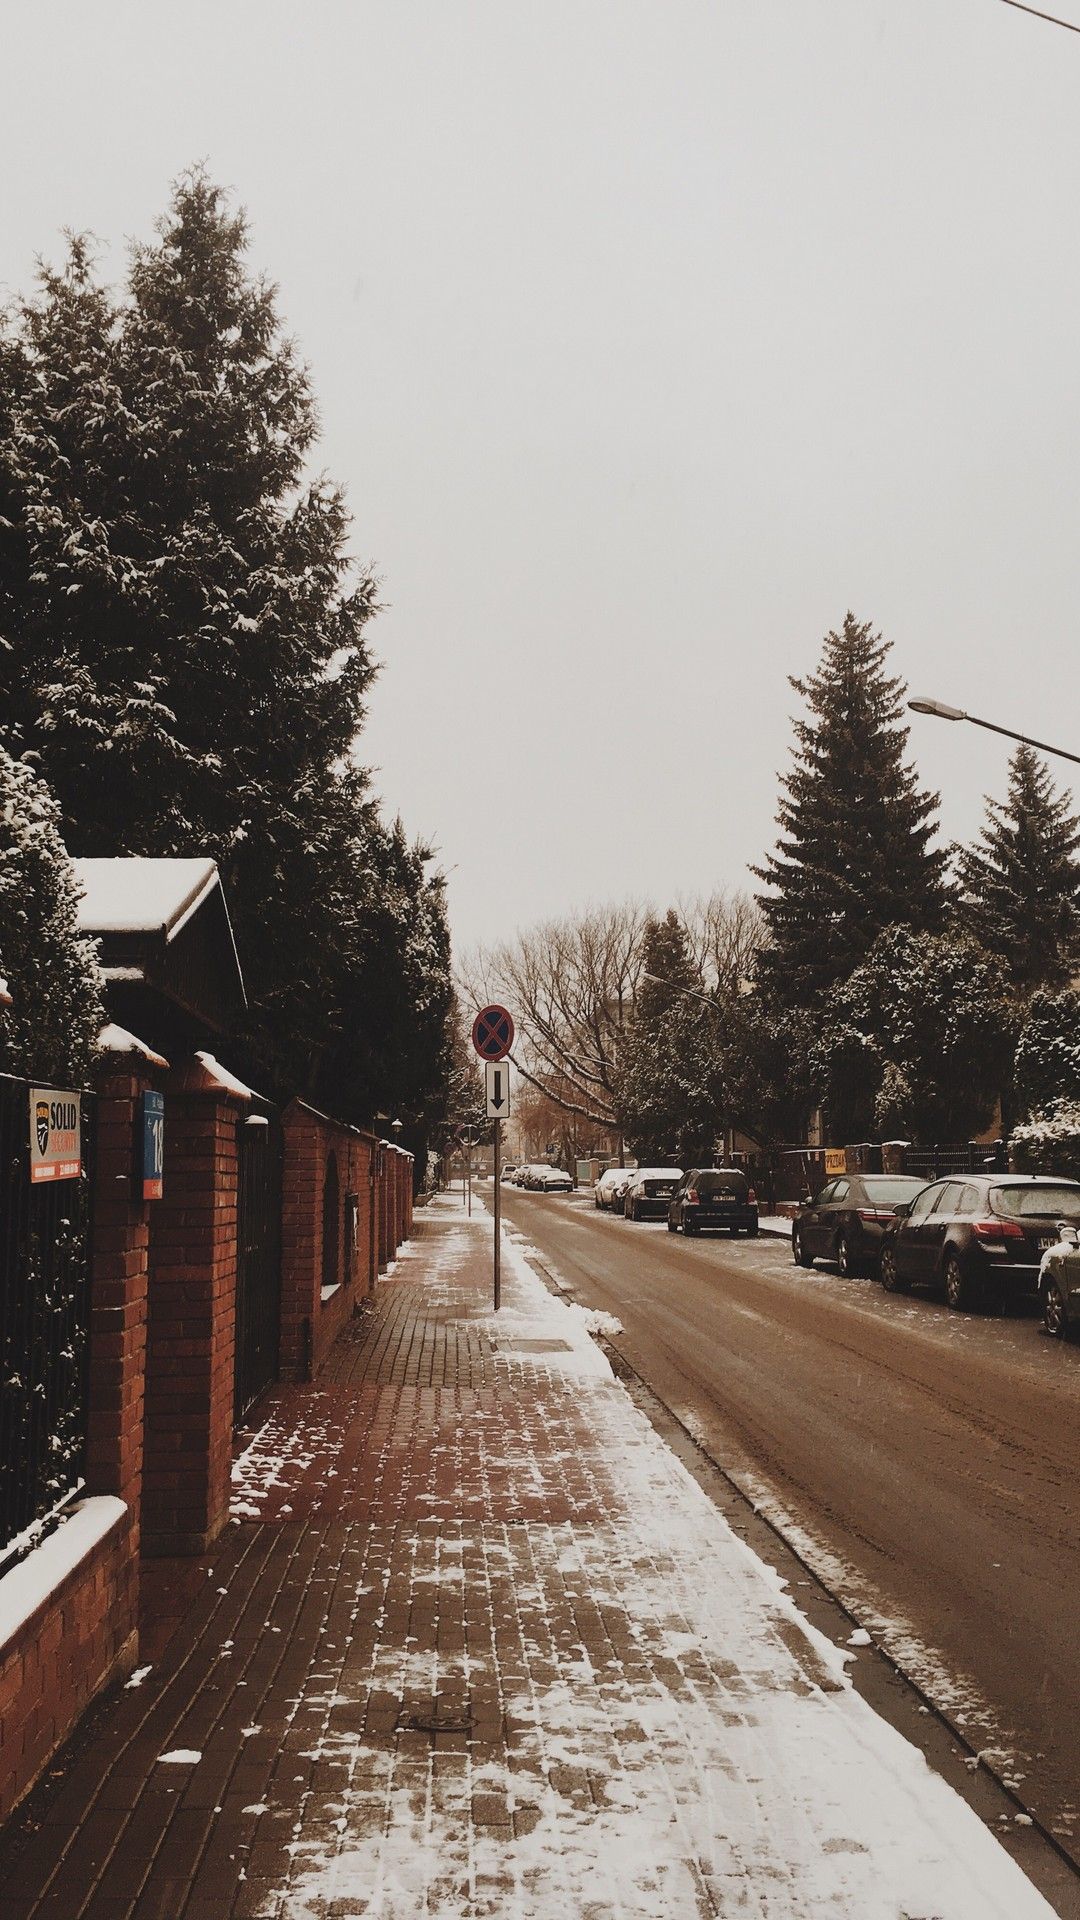 A street with cars parked on it and snow - Los Angeles, winter